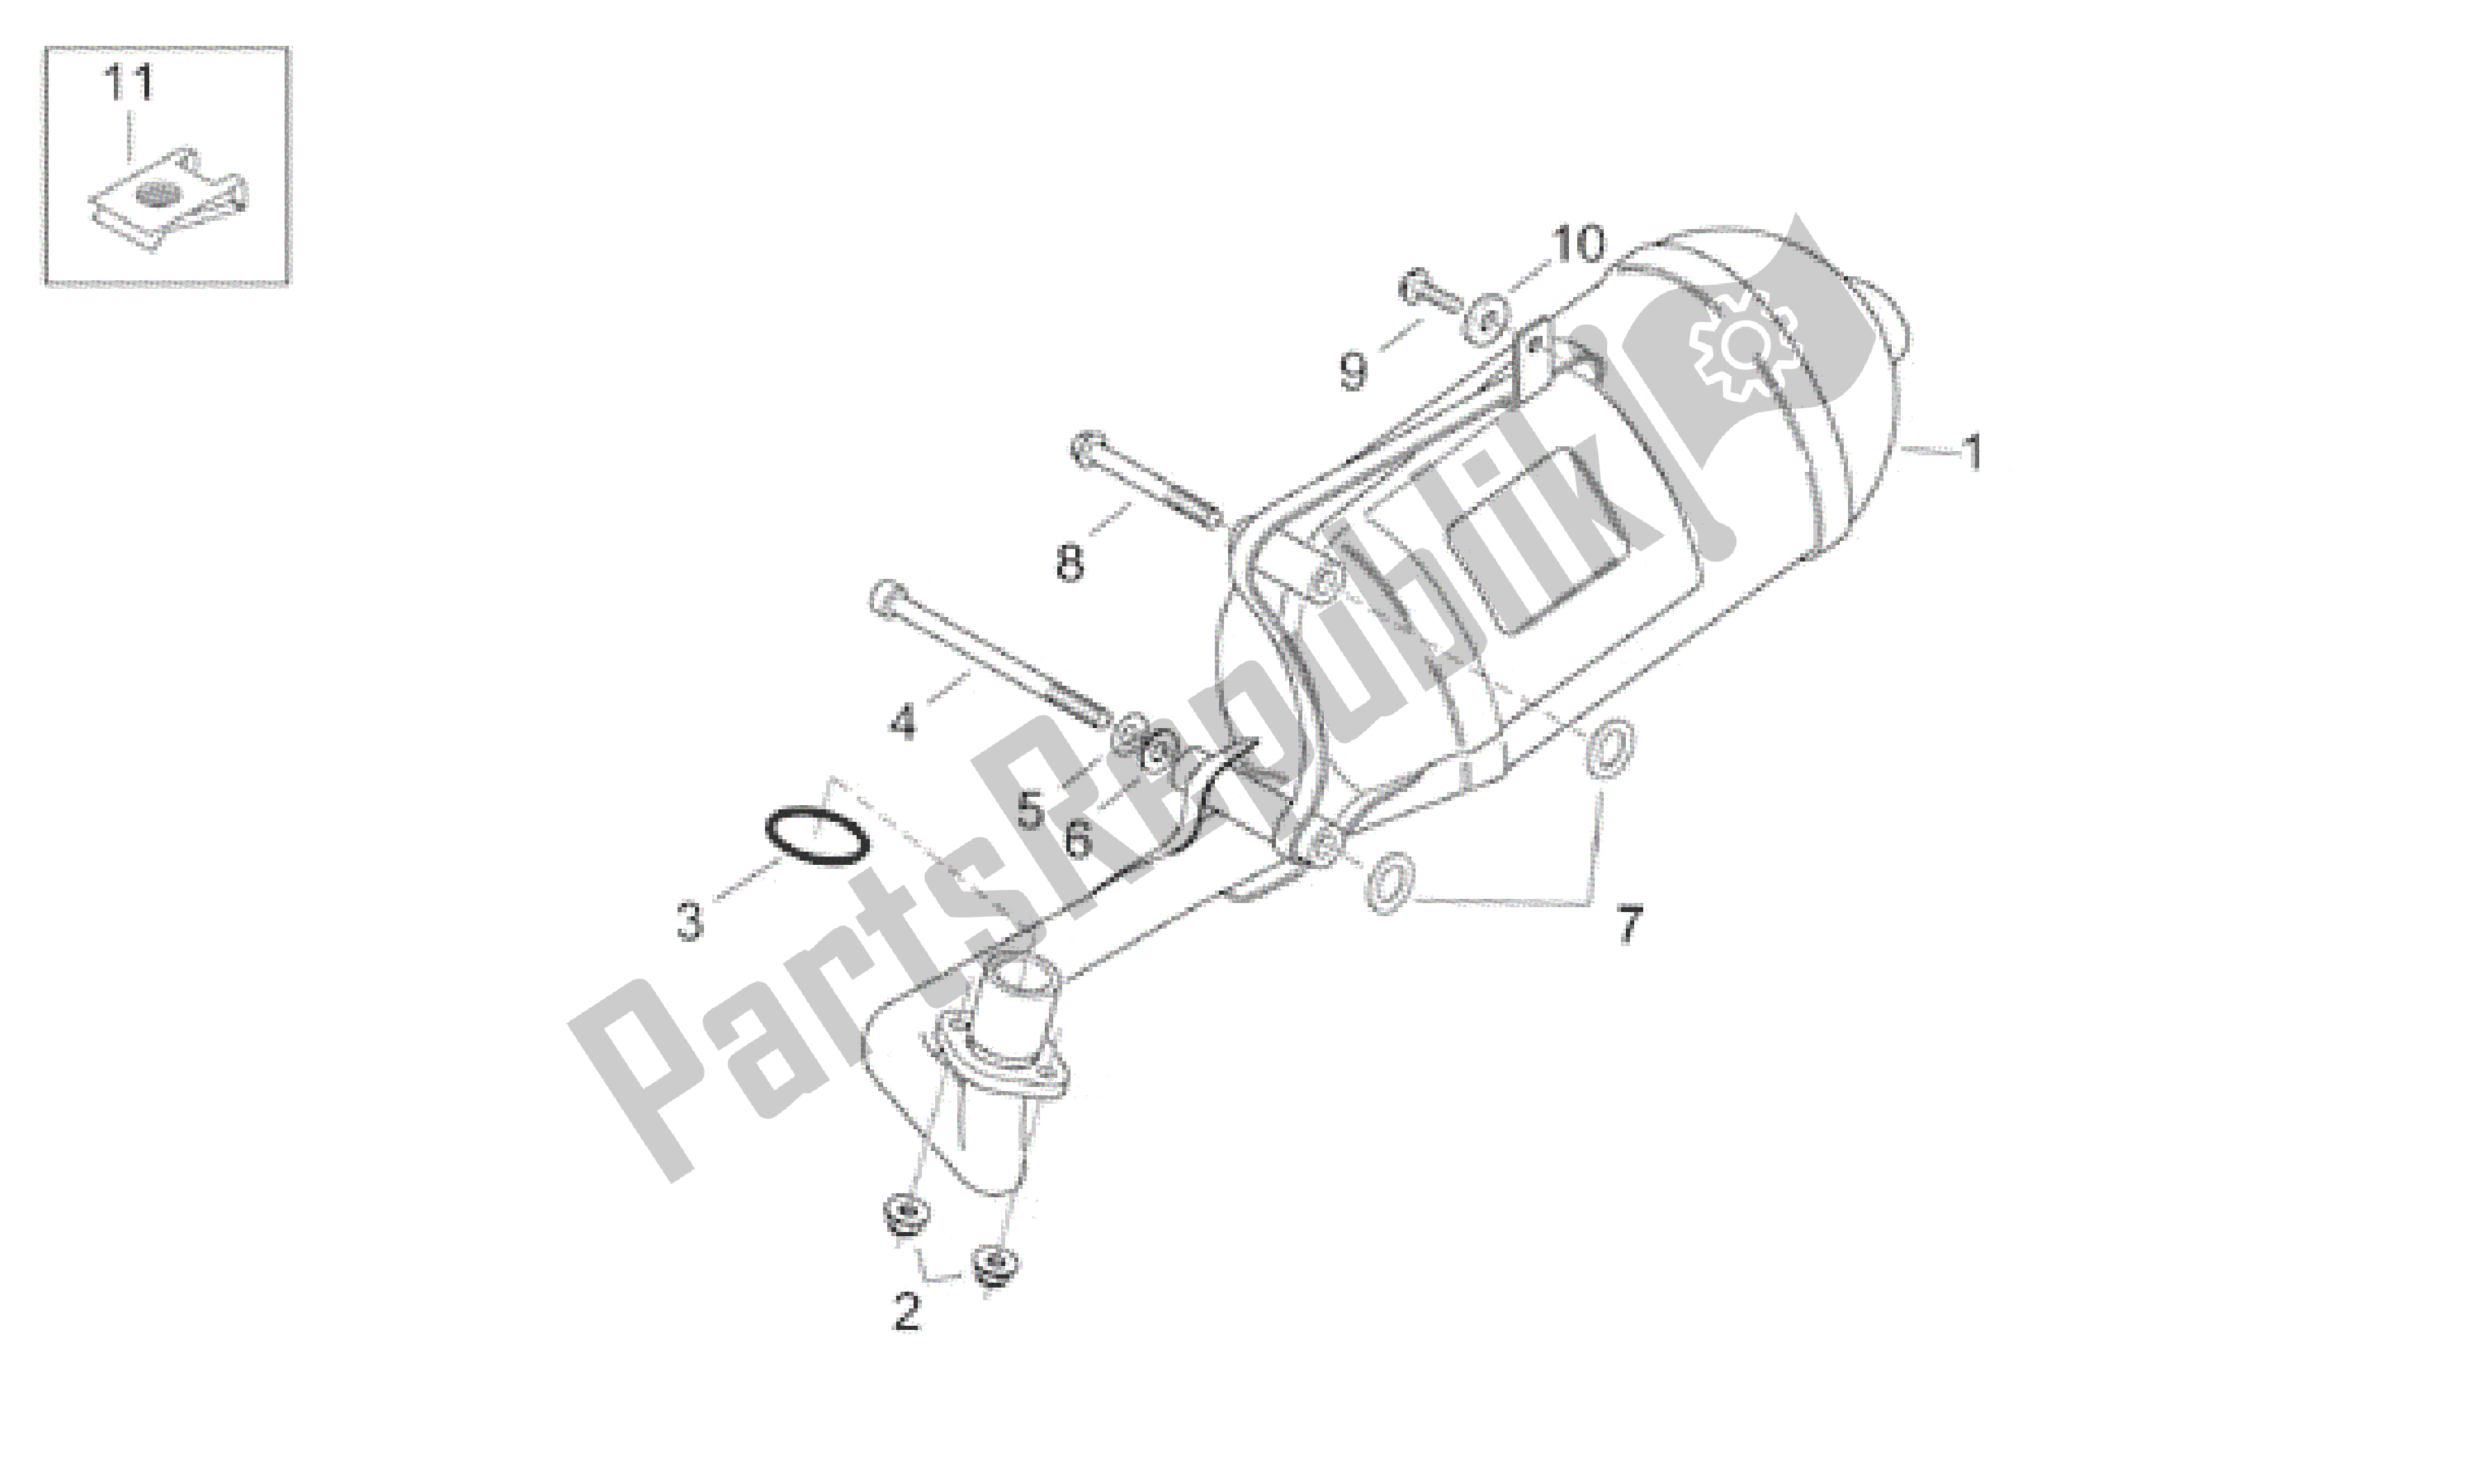 All parts for the Exhaust Unit of the Aprilia Habana 125 1999 - 2001